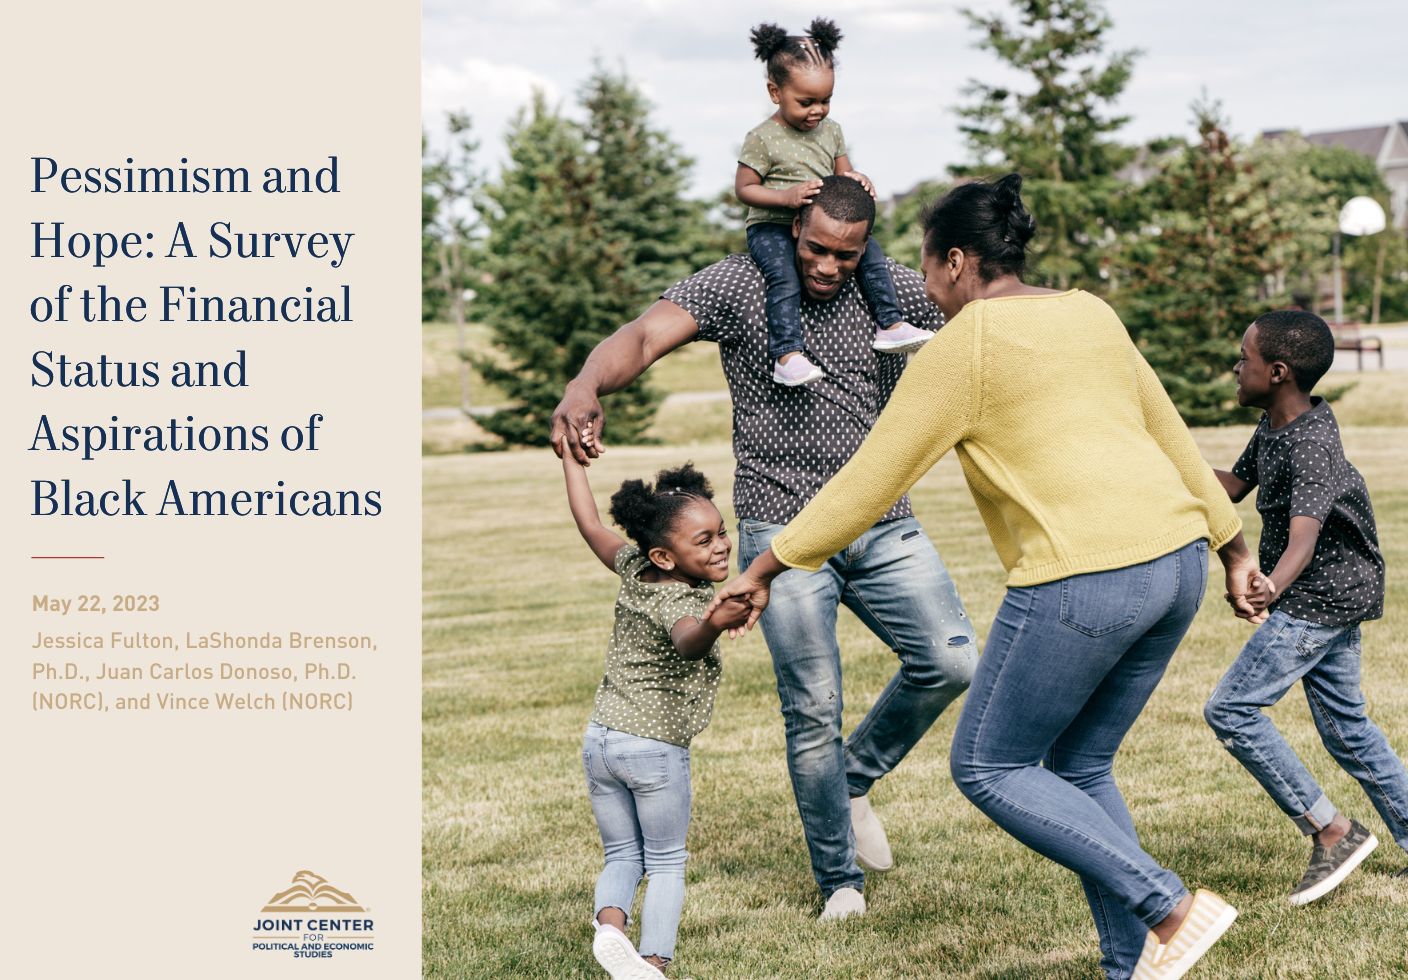 Pessimism and Hope A Survey of the Financial Status and Aspirations of Black Americans